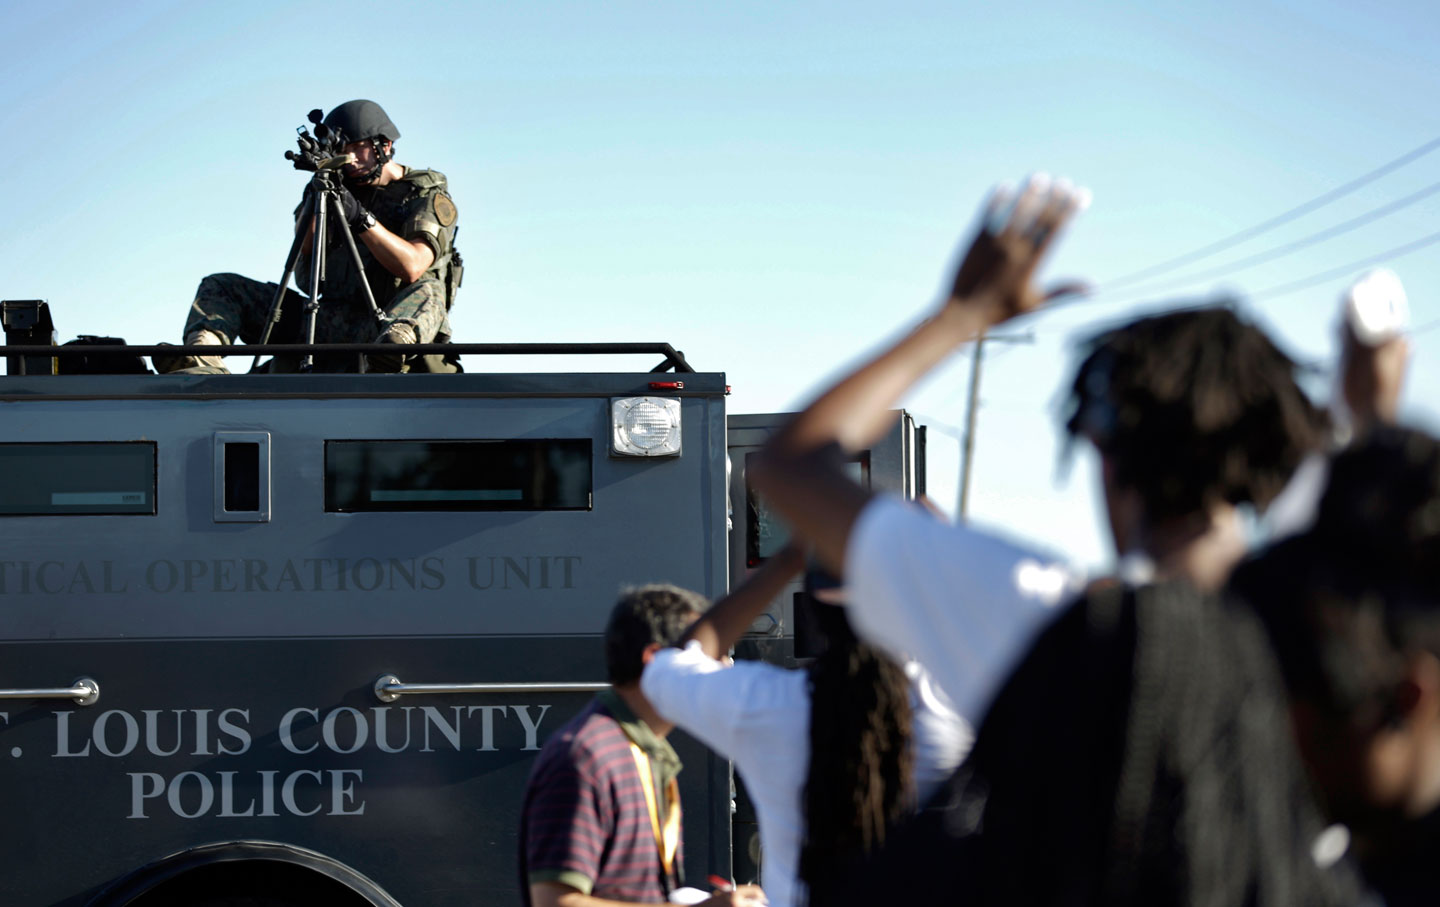 A member of the St. Louis County Police Department points his weapon in the direction of a group of protesters in Ferguson, MO.